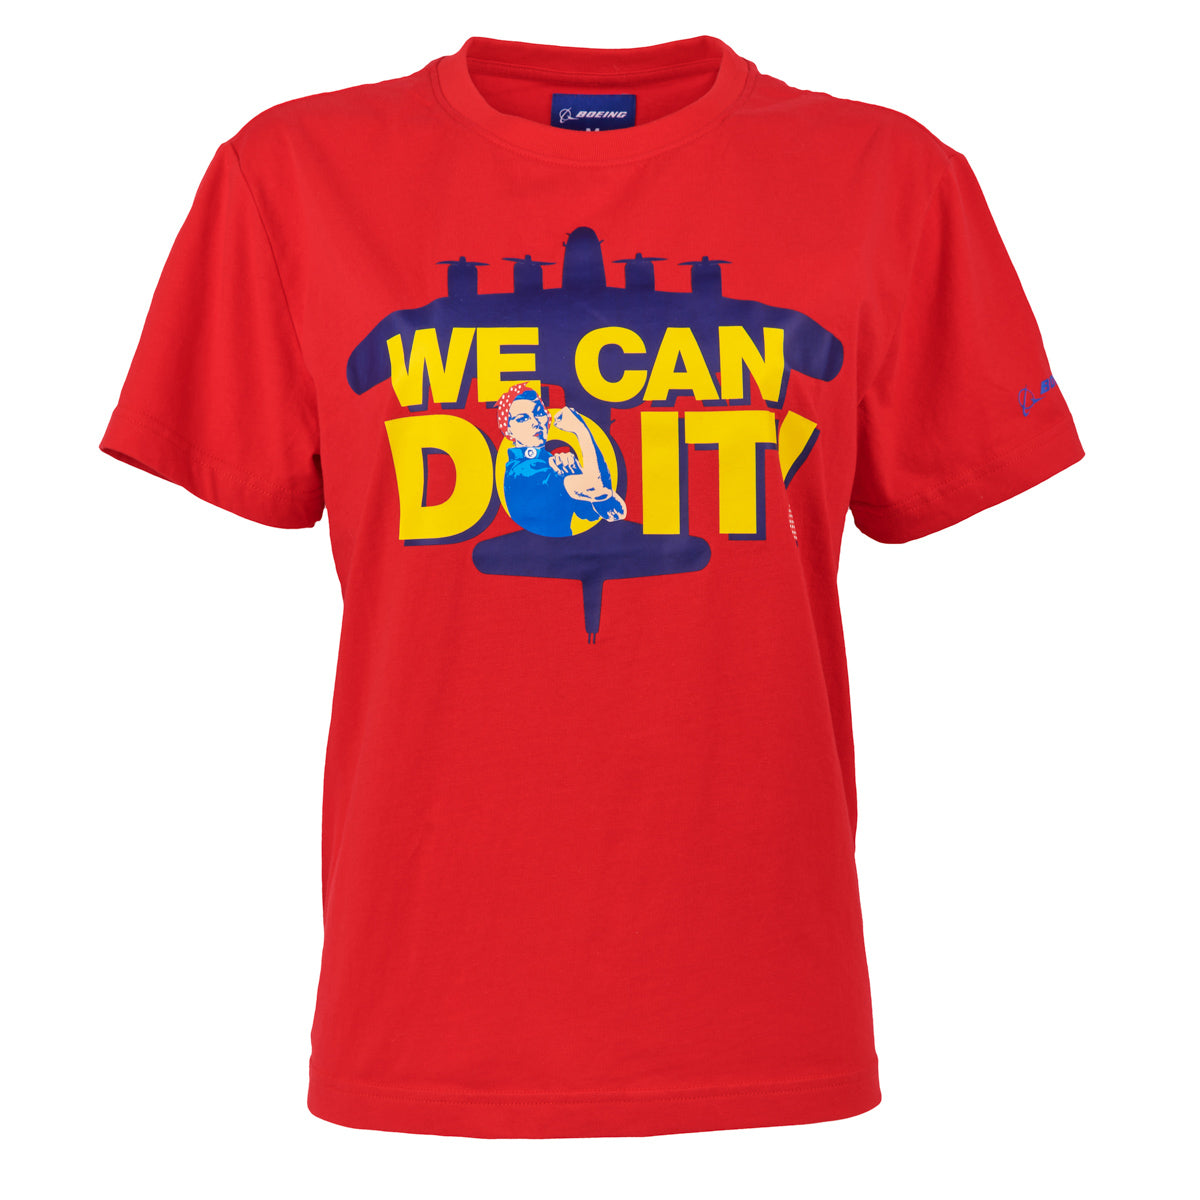 Rosie we can do it quote overlay on navy blue Boeing B-17 printed in the center on a red t-shirt. 